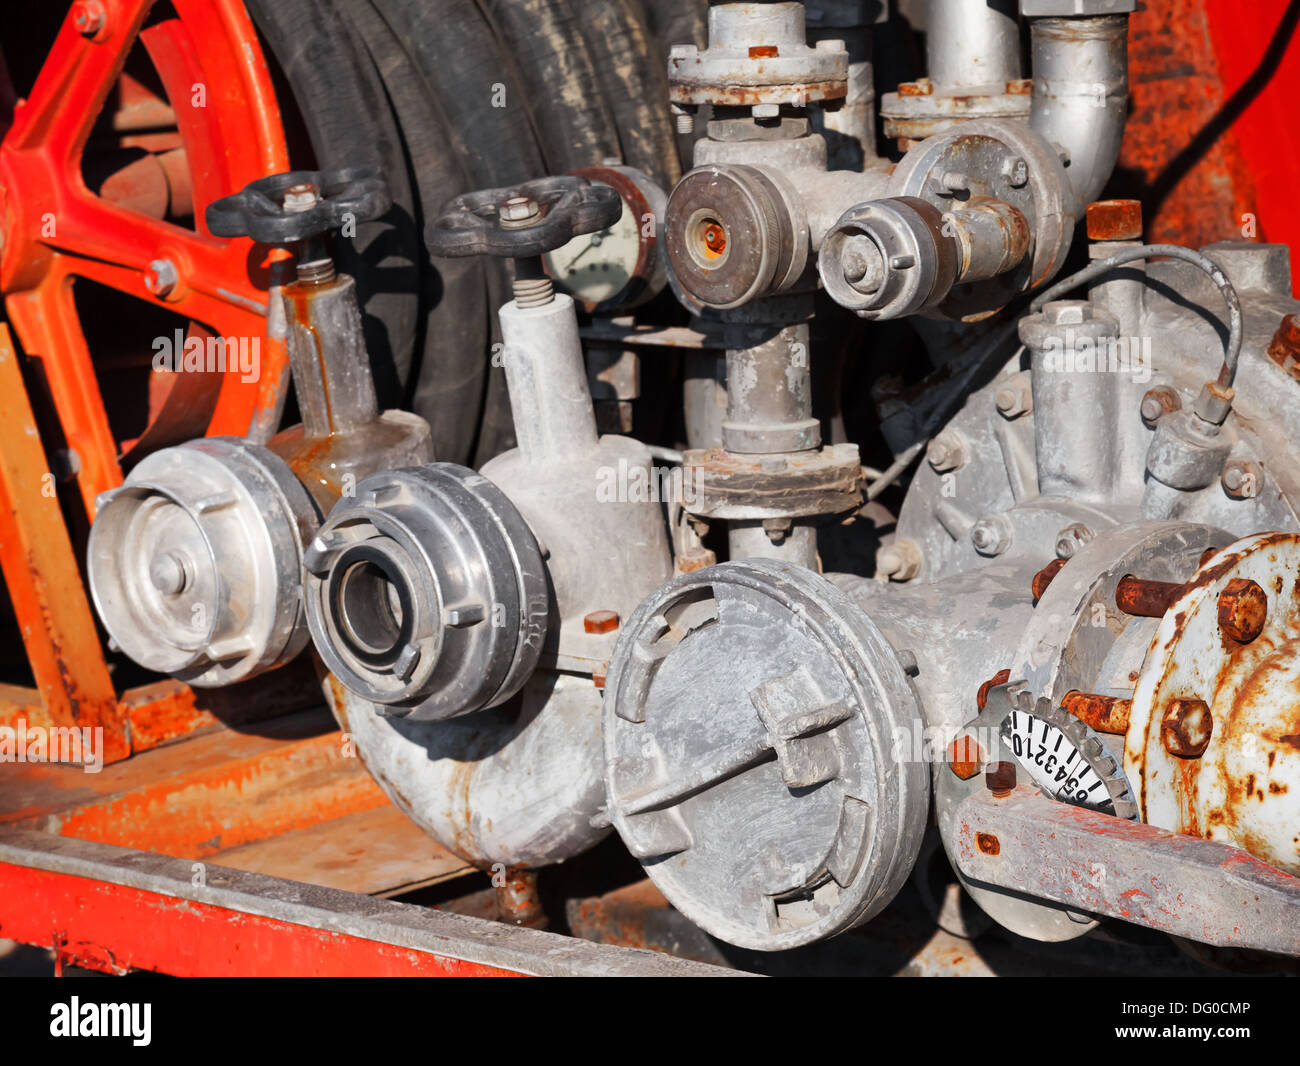 Water pump with hydrants. Firefighters Equipment of old fire truck Stock Photo